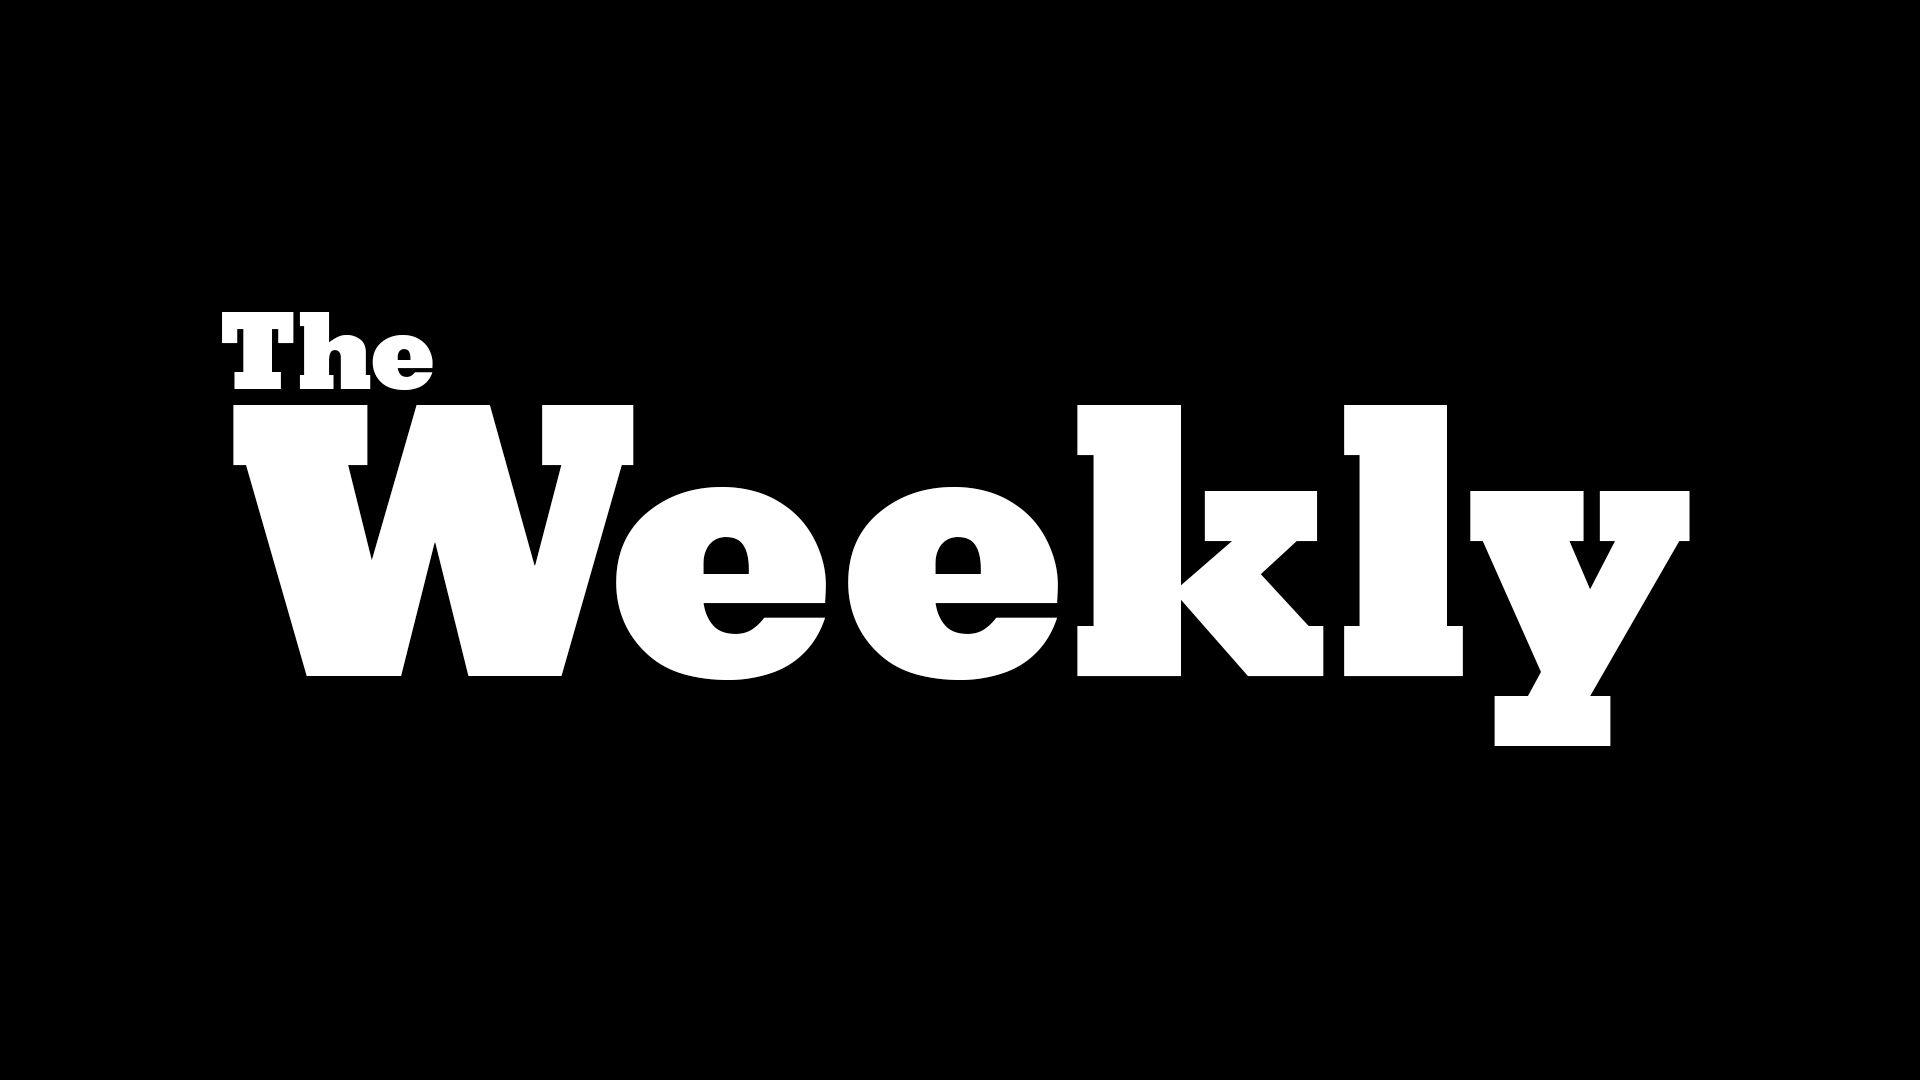 Black and Red Arrow Logo - The Weekly